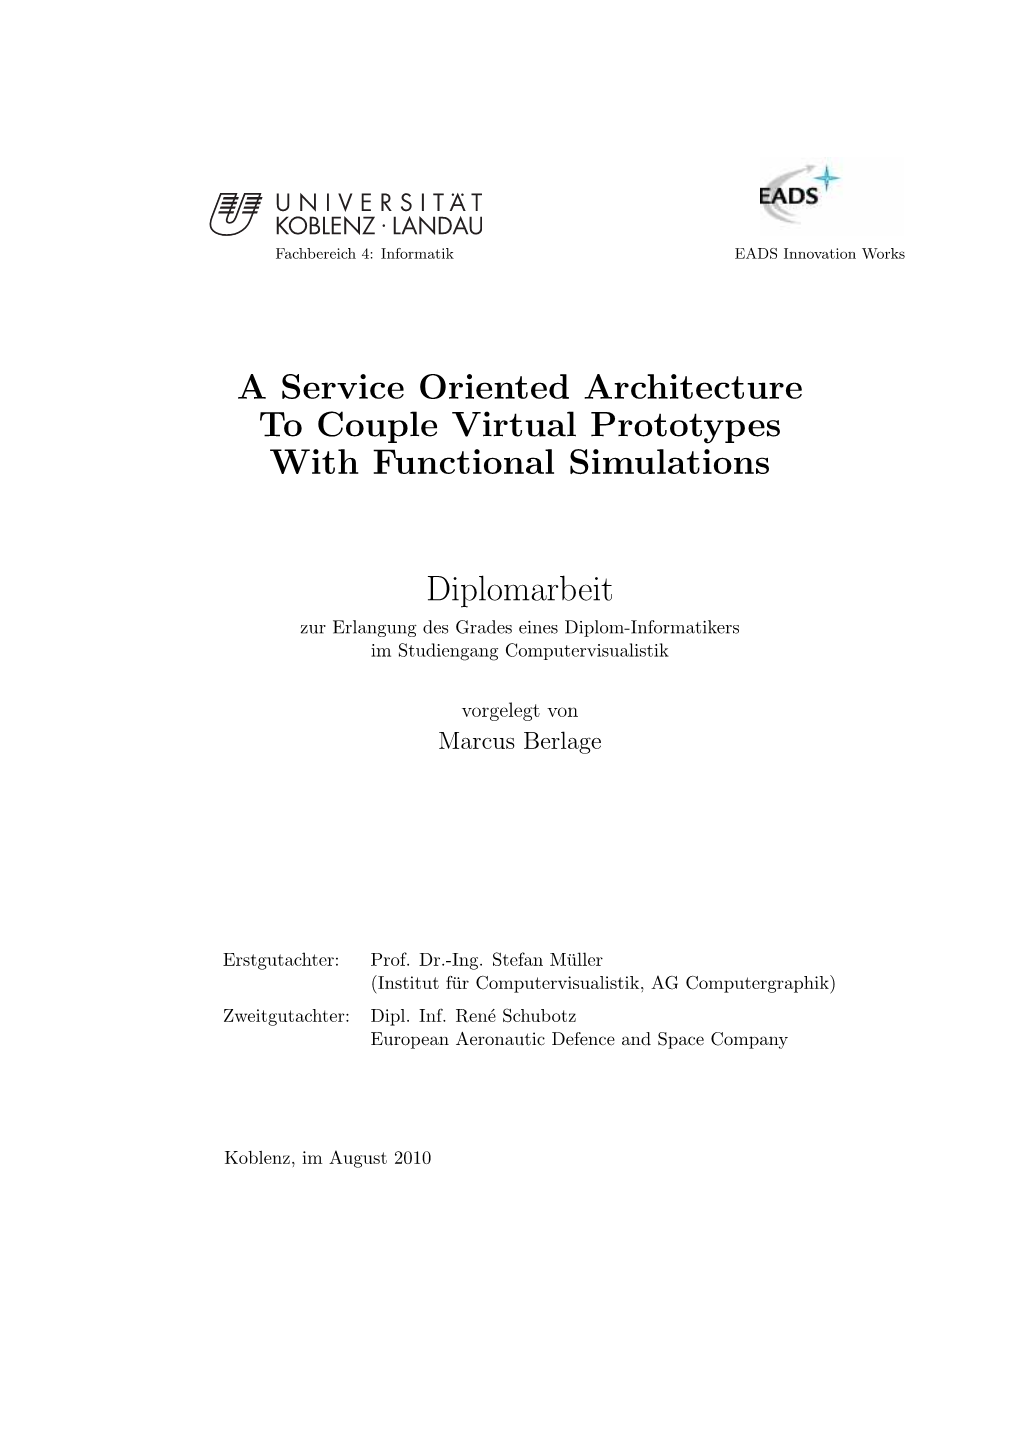 A Service Oriented Architecture to Couple Virtual Prototypes with Functional Simulations